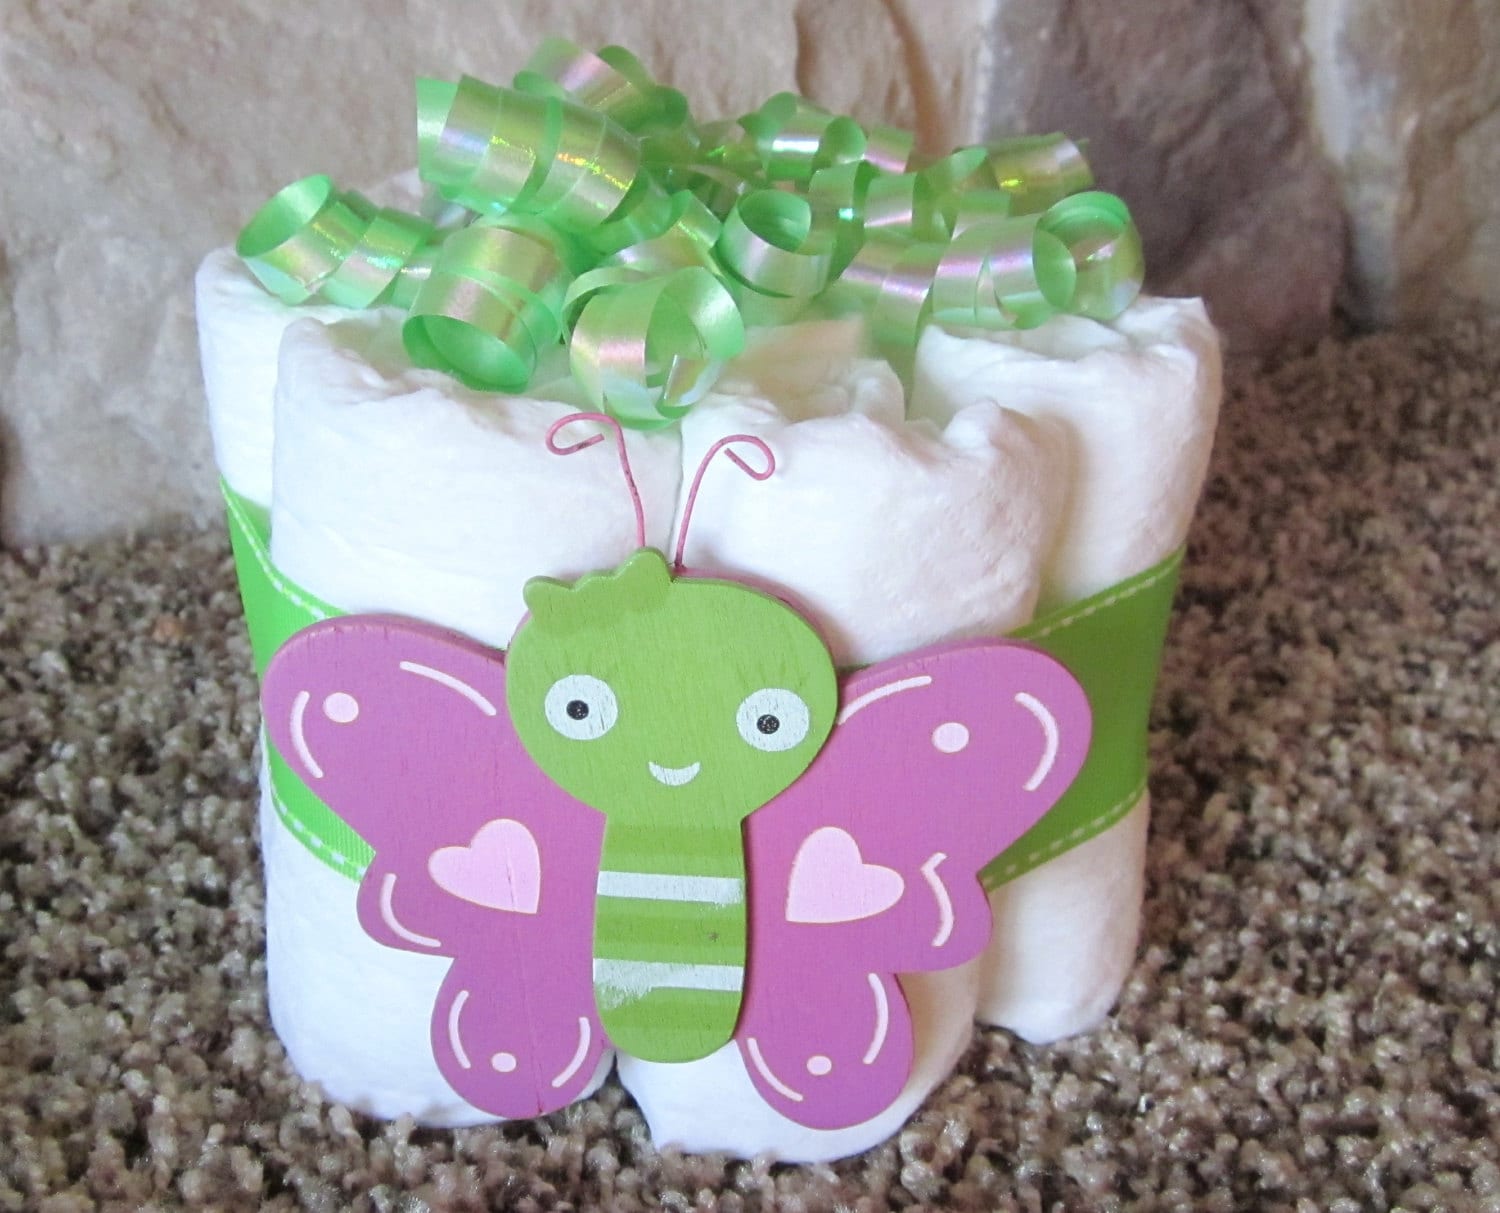 Popular items for pampers diapers on Etsy